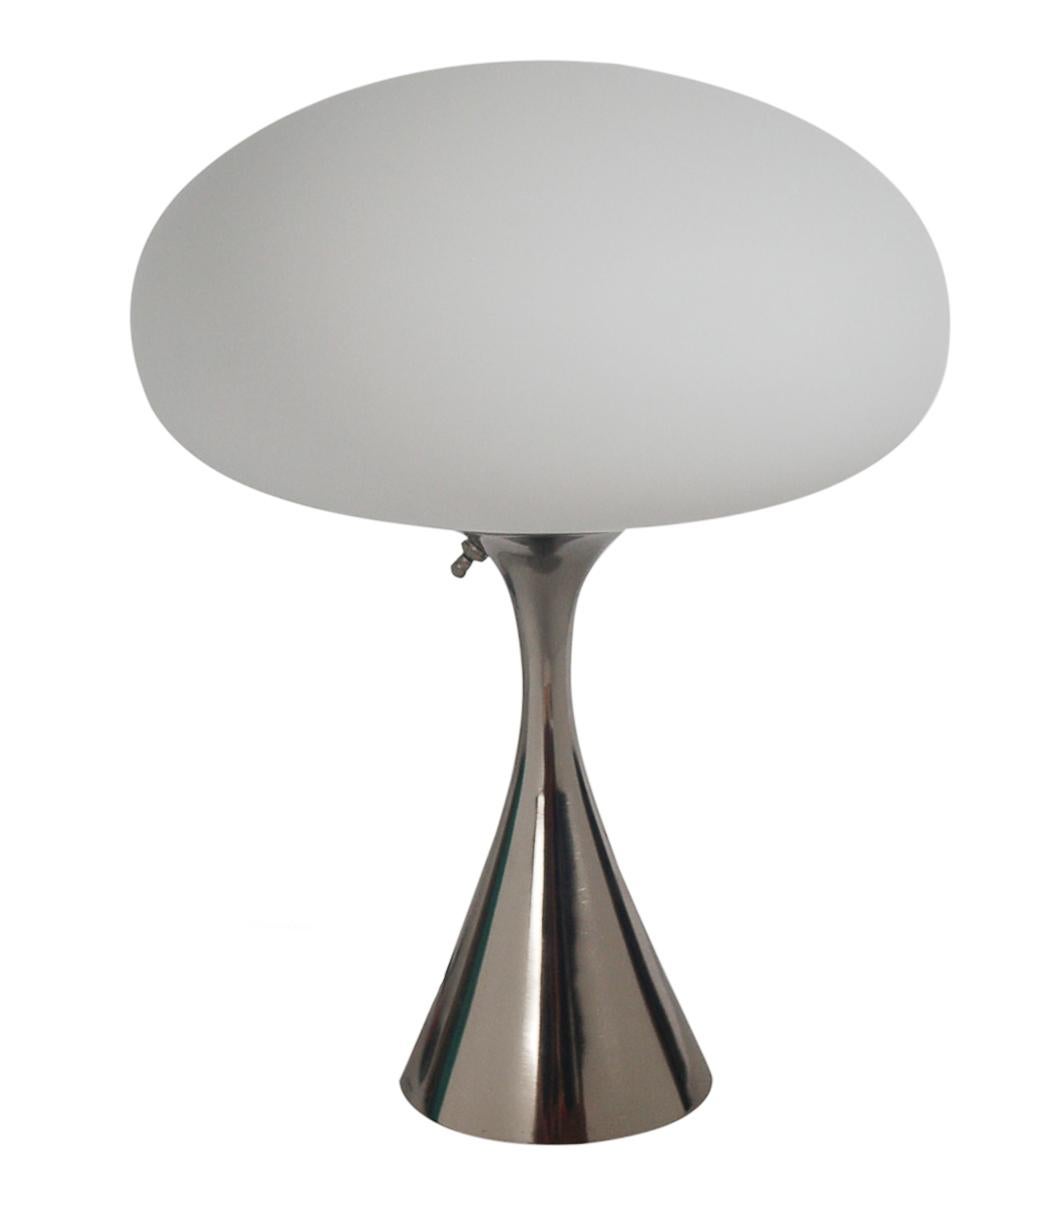 Indian Mid-Century Modern Mushroom Table Lamp by Designline in Chrome & White Shade For Sale